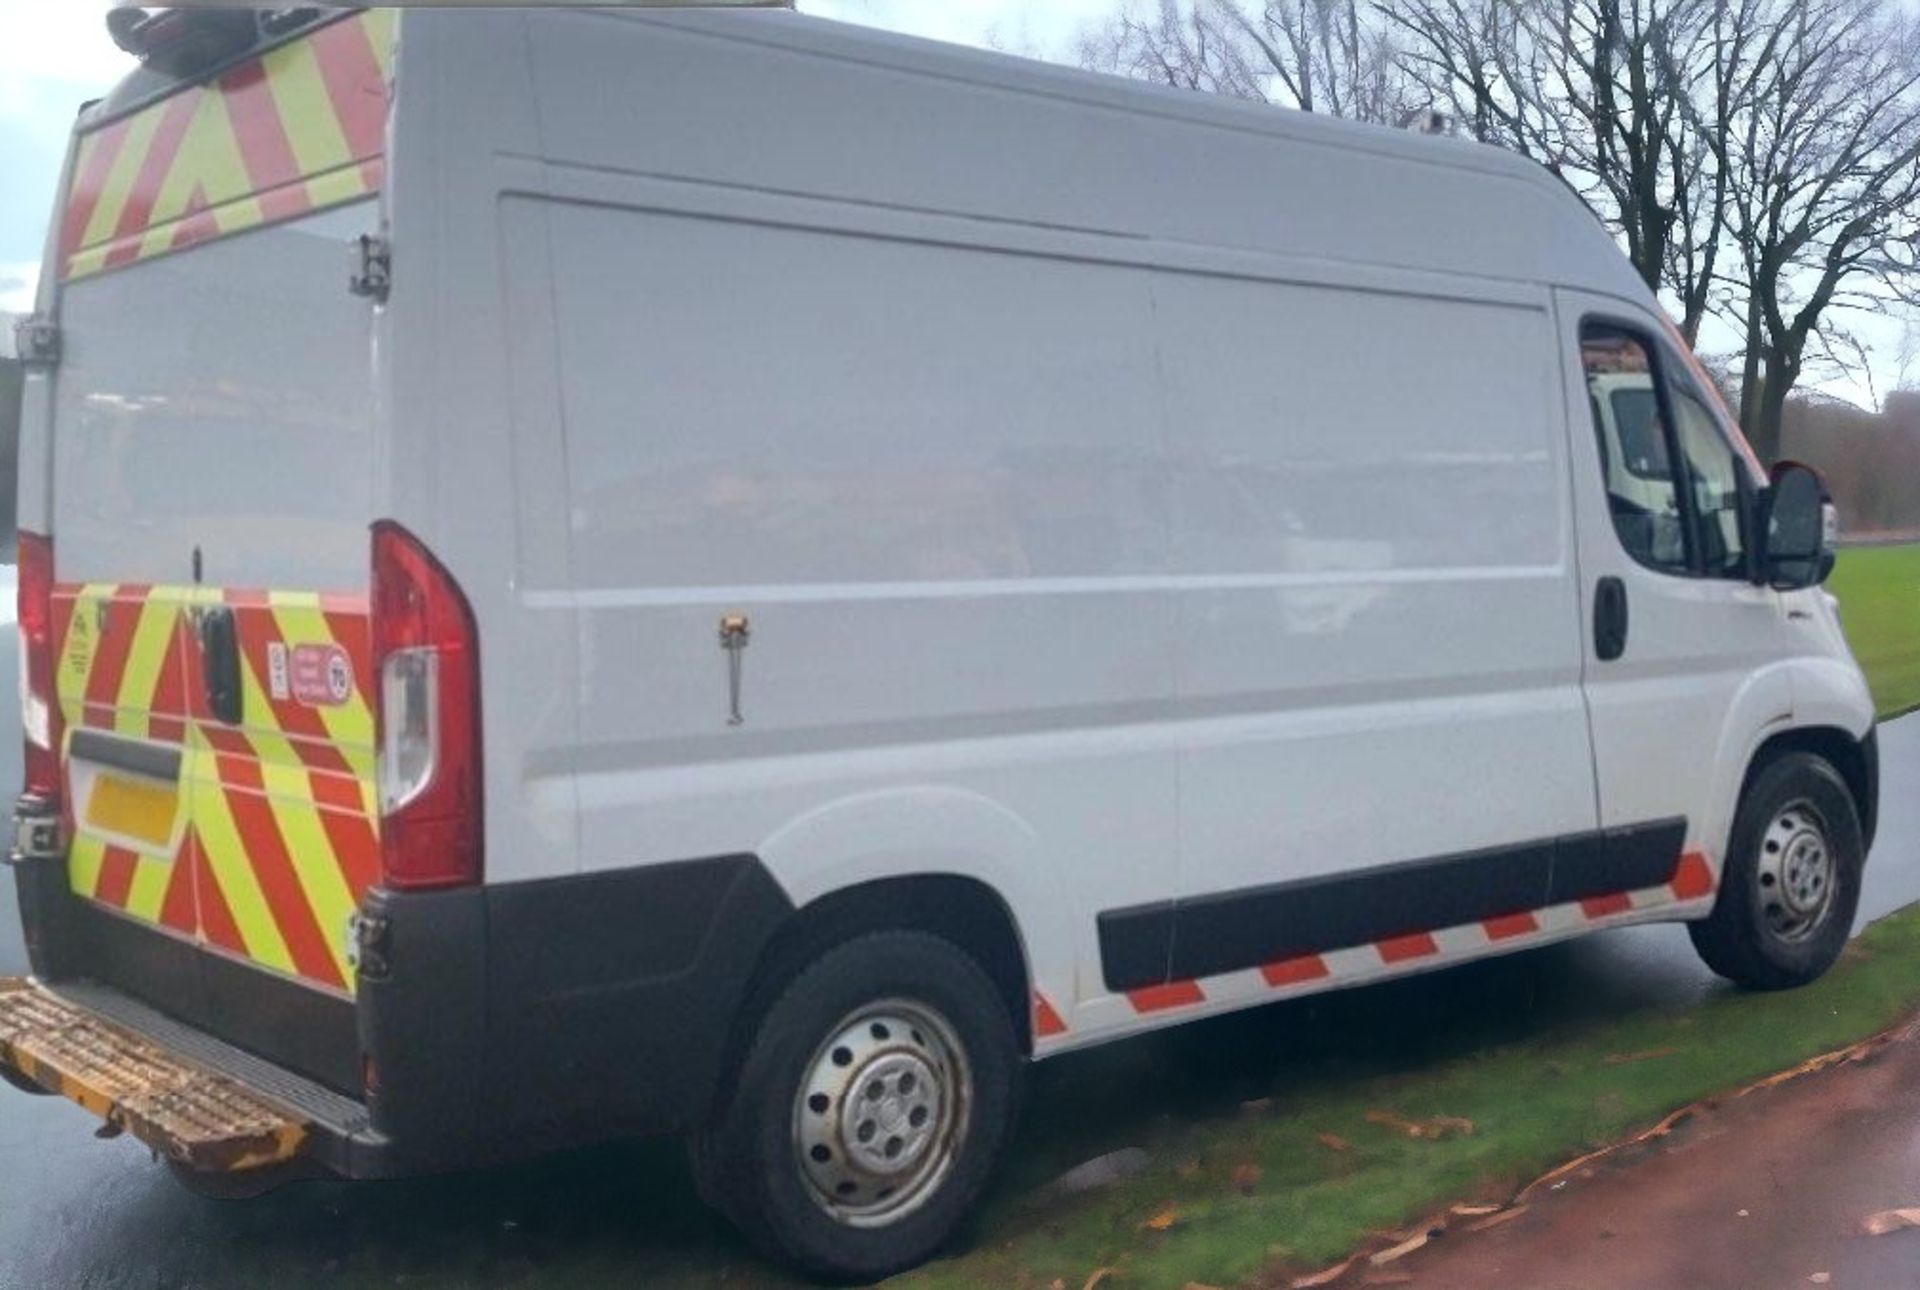 2019 FIAT DUCATO L2 MWB PANEL VAN - VERSATILE AND RELIABLE FOR YOUR BUSINESS NEEDS - Image 2 of 18